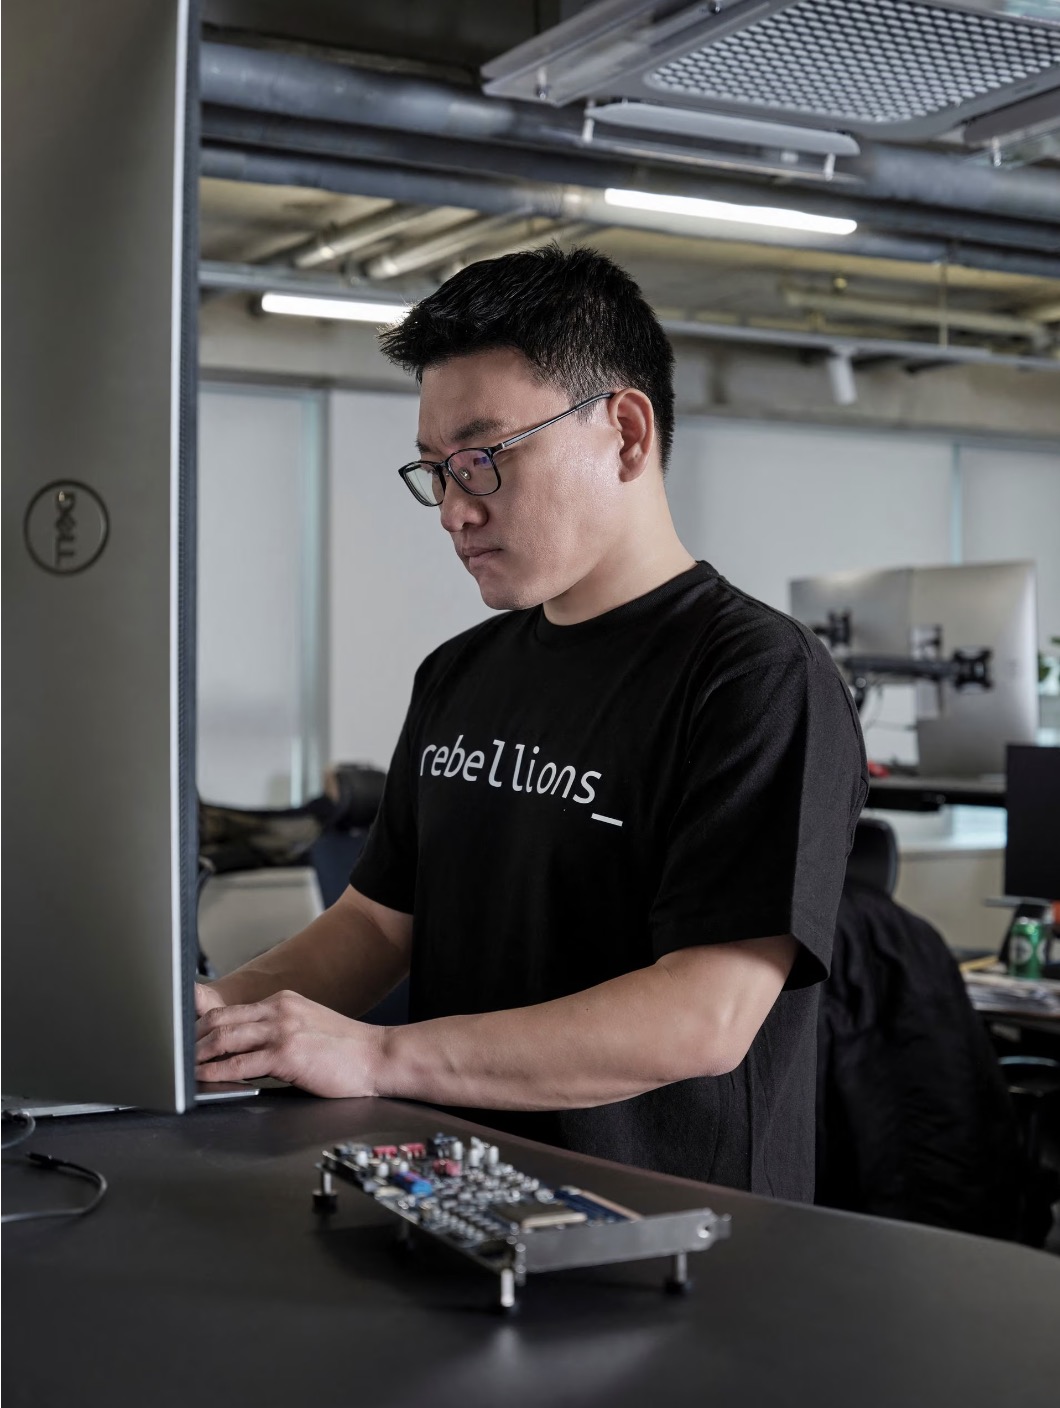  AI chip startup Rebellions co-founder and chief executive Park Sunghyun works at the company headquarters in Seongnam, South Korea, February 2023. /Reuters